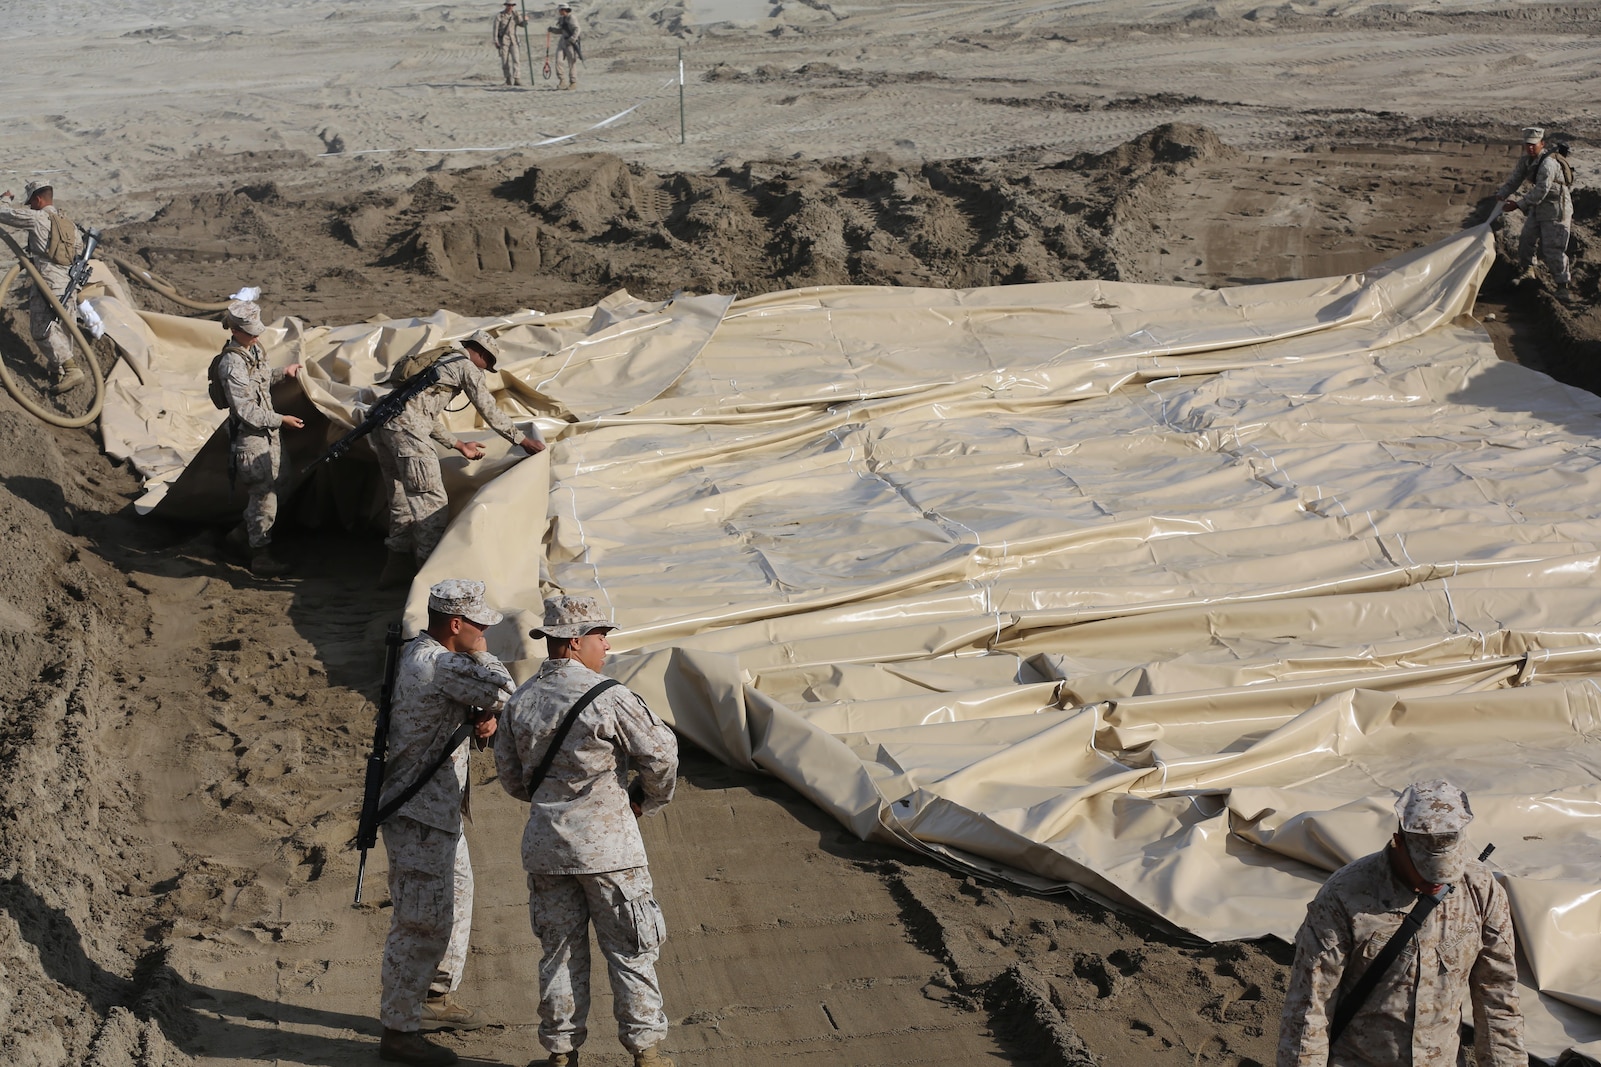 U.S. Marines with Bulk Fuel Company, 7th Engineer Support Battalion, 1st Marine Logistics Group, roll out a berm liner on Camp Pendleton Calif., May 1, 2015. The berm liner is used as part of the Beach Unloading System used to house fuel, which is pumped from a ship off shore. (U.S. Marine Corps Photo by Cpl. Rodion Zabolotniy, Combat Camera/Released)